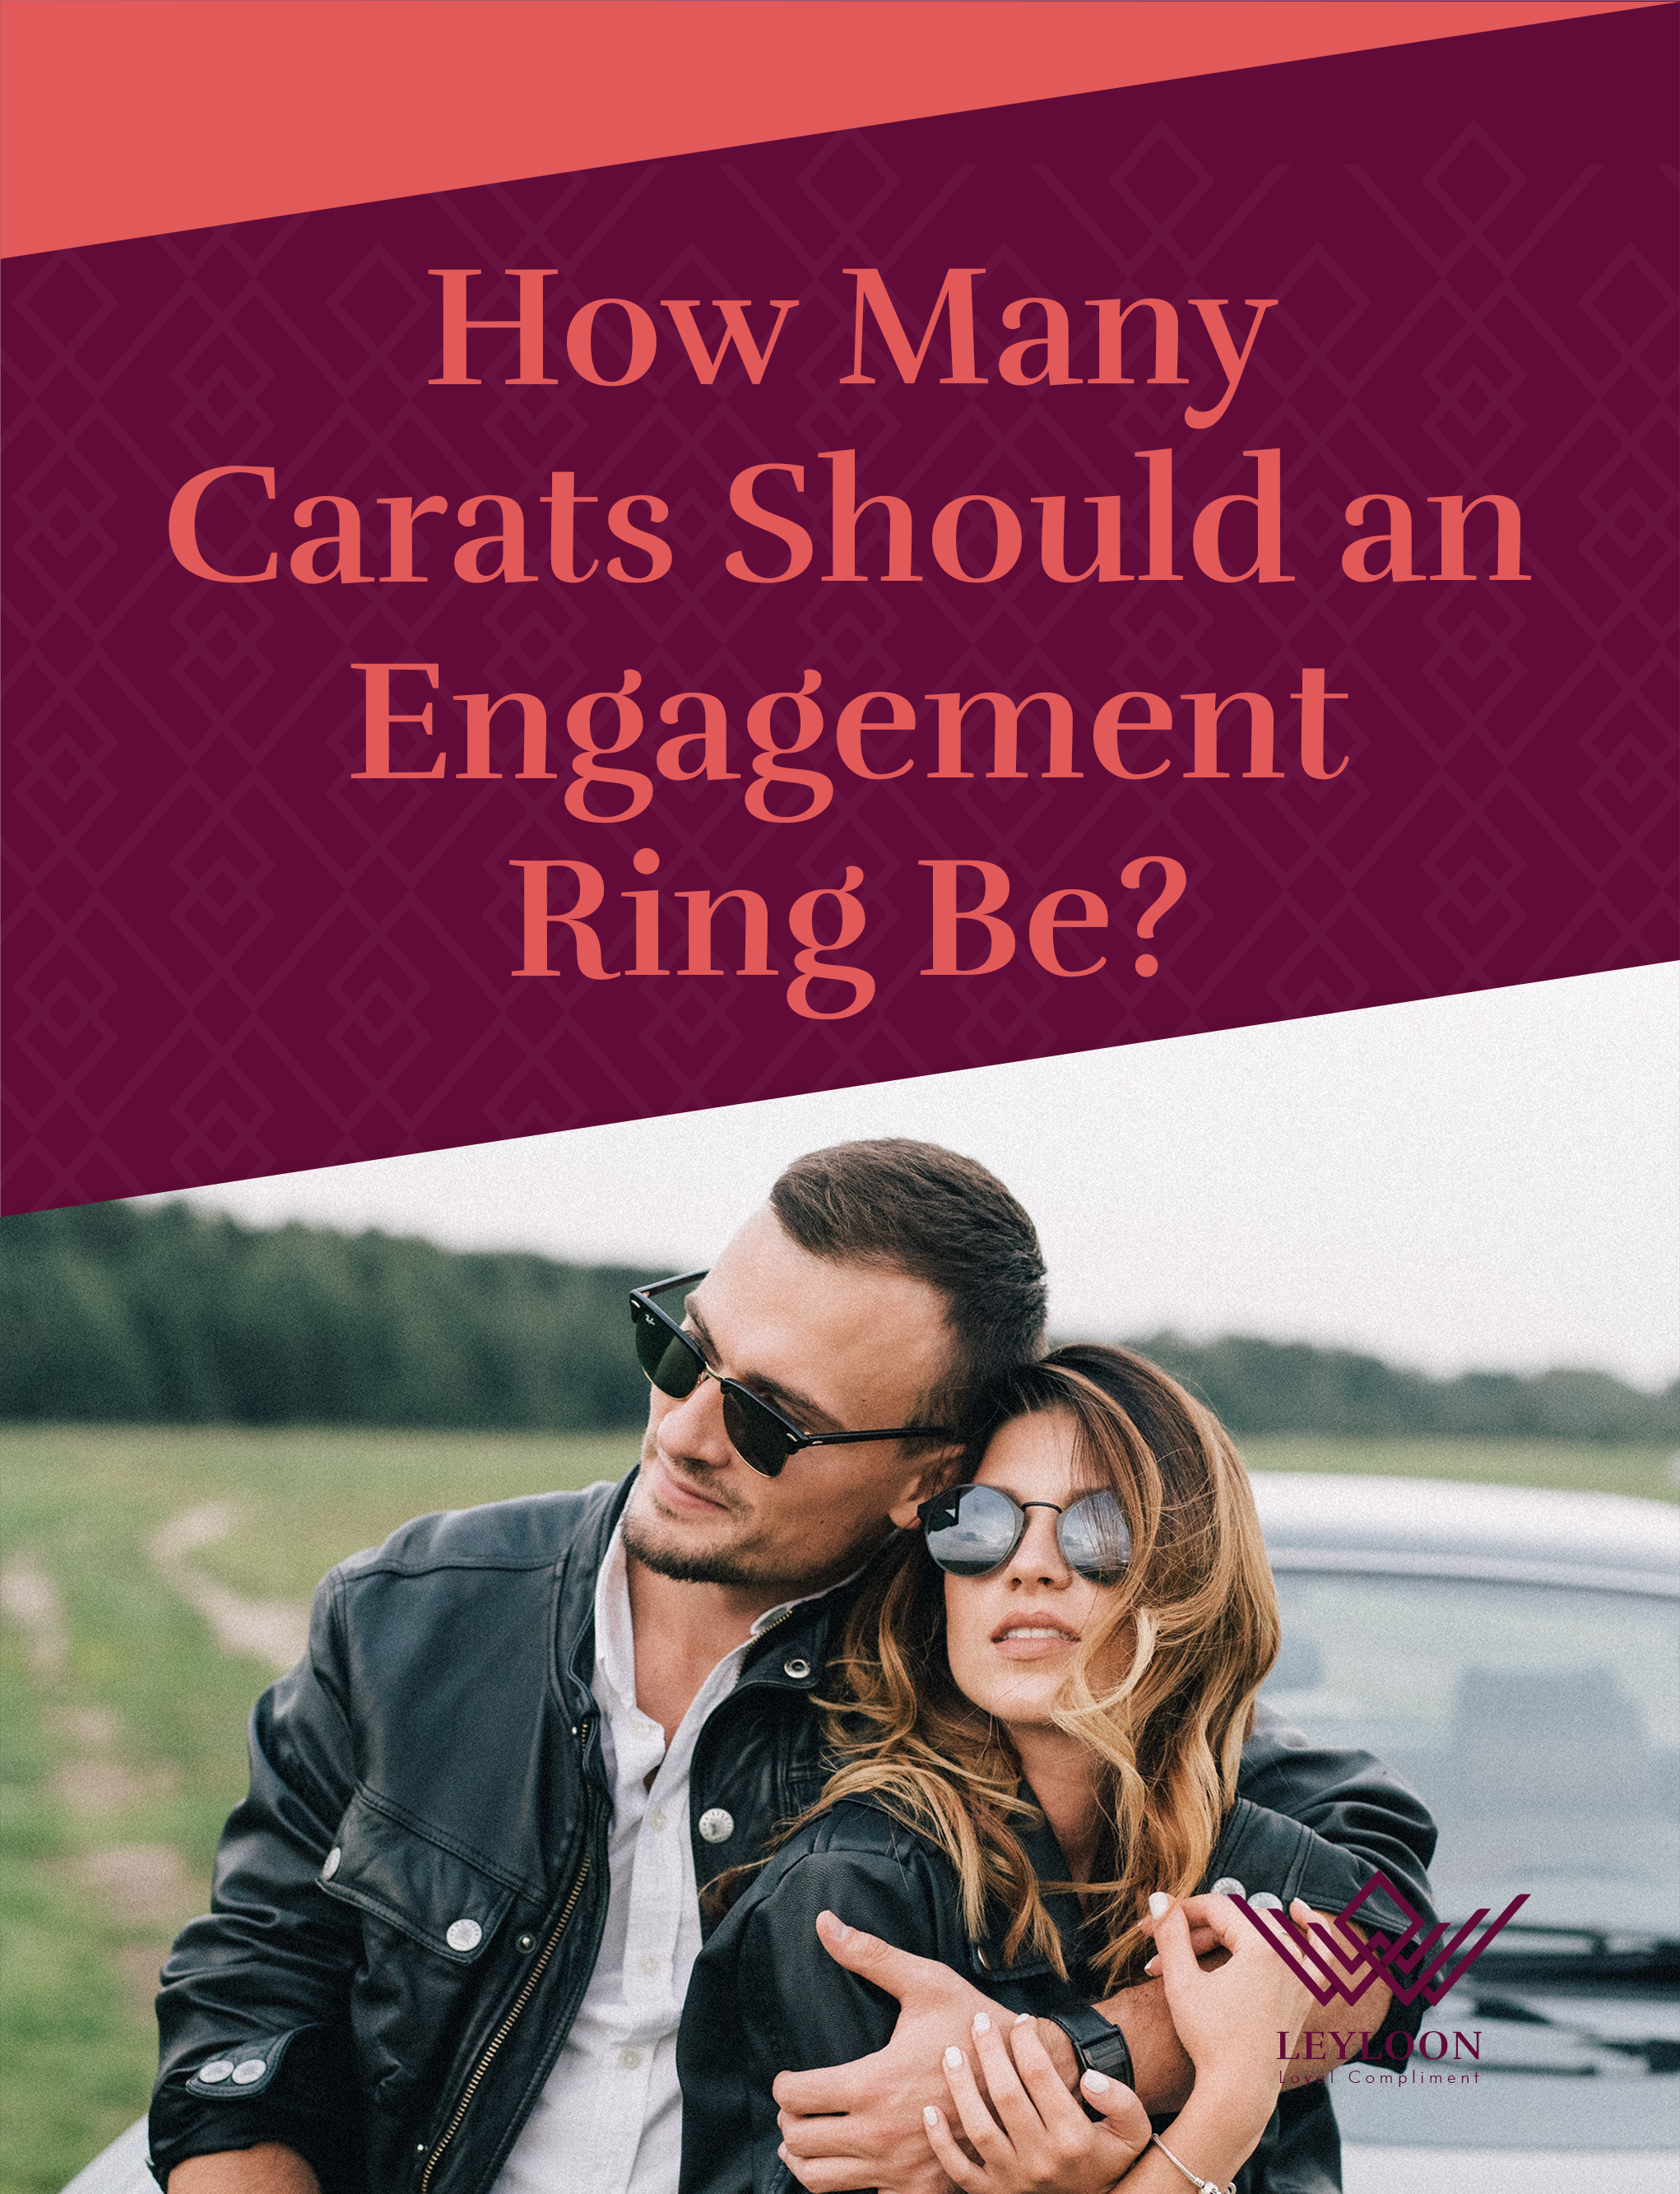 How Many Carats Should an Engagement Ring Be?